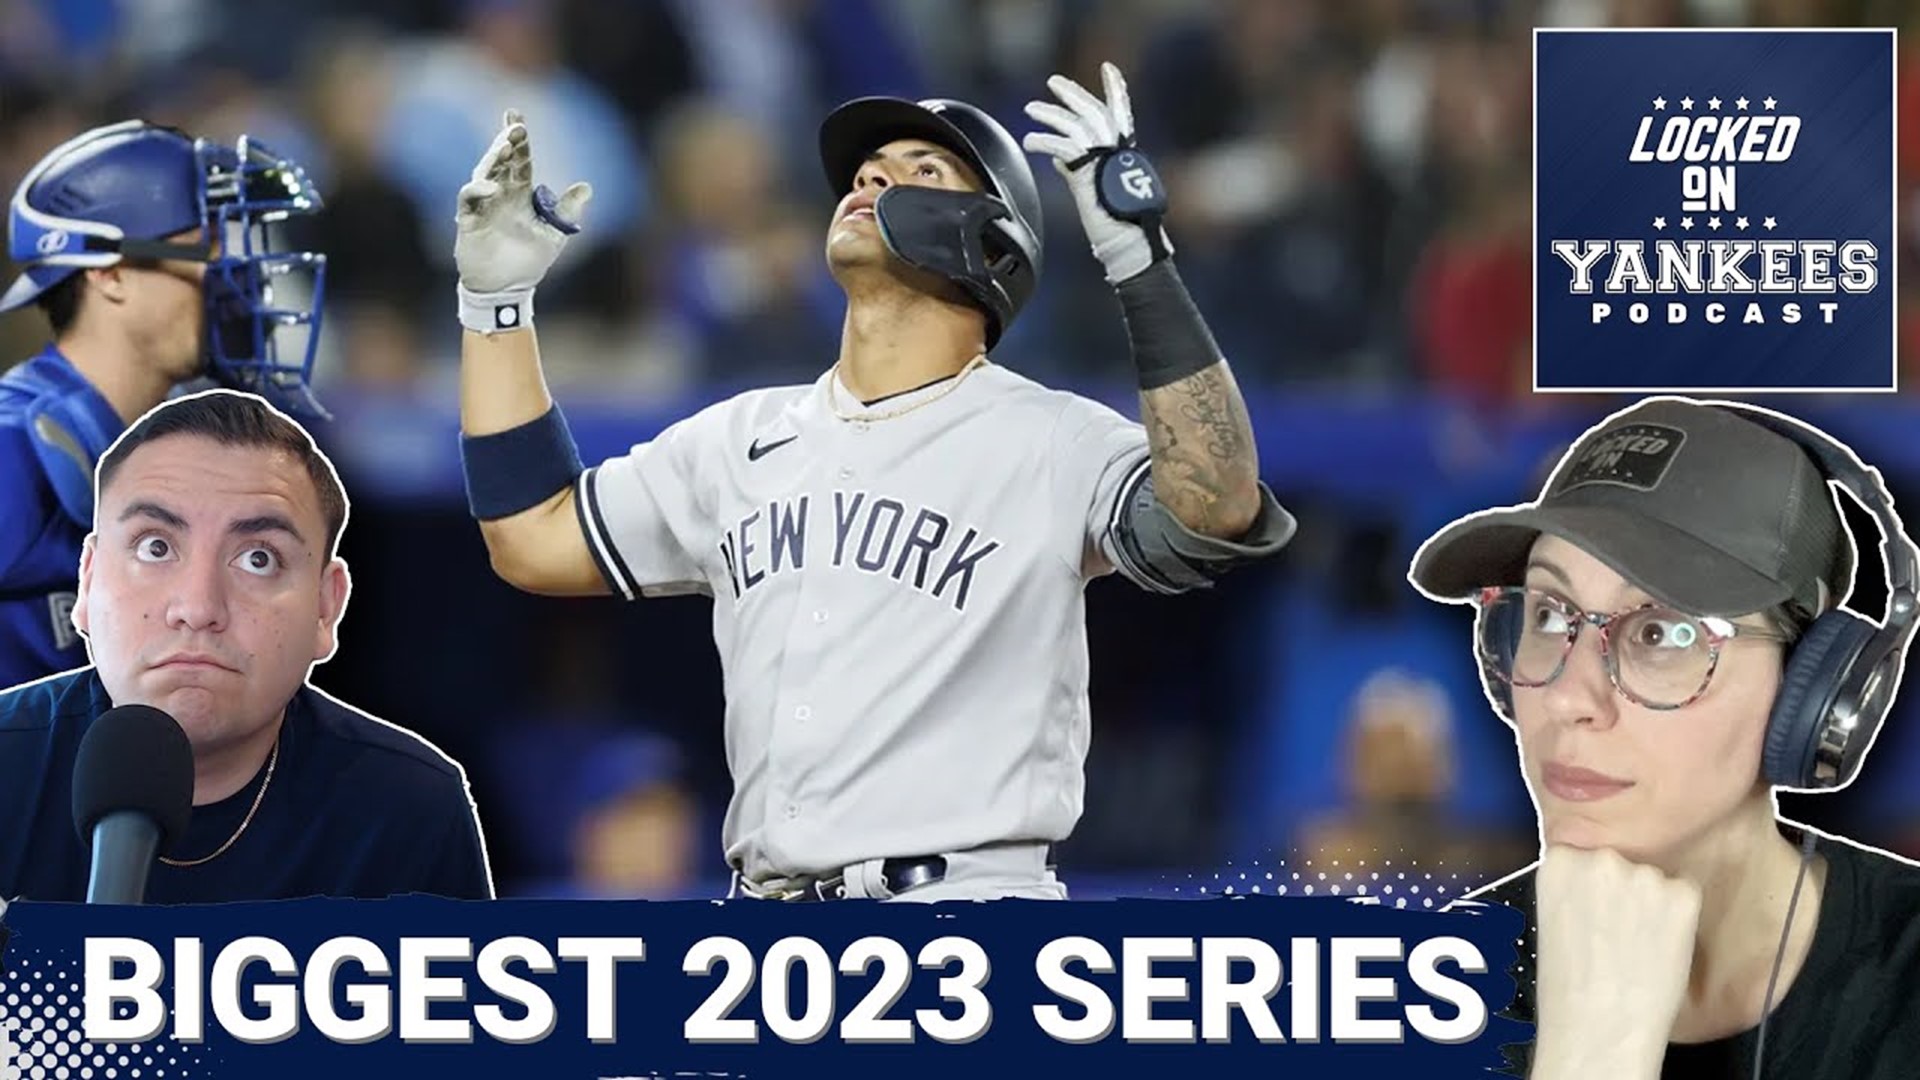 The New York Yankees have the chance to spoil the Toronto Blue Jays’ playoff run.